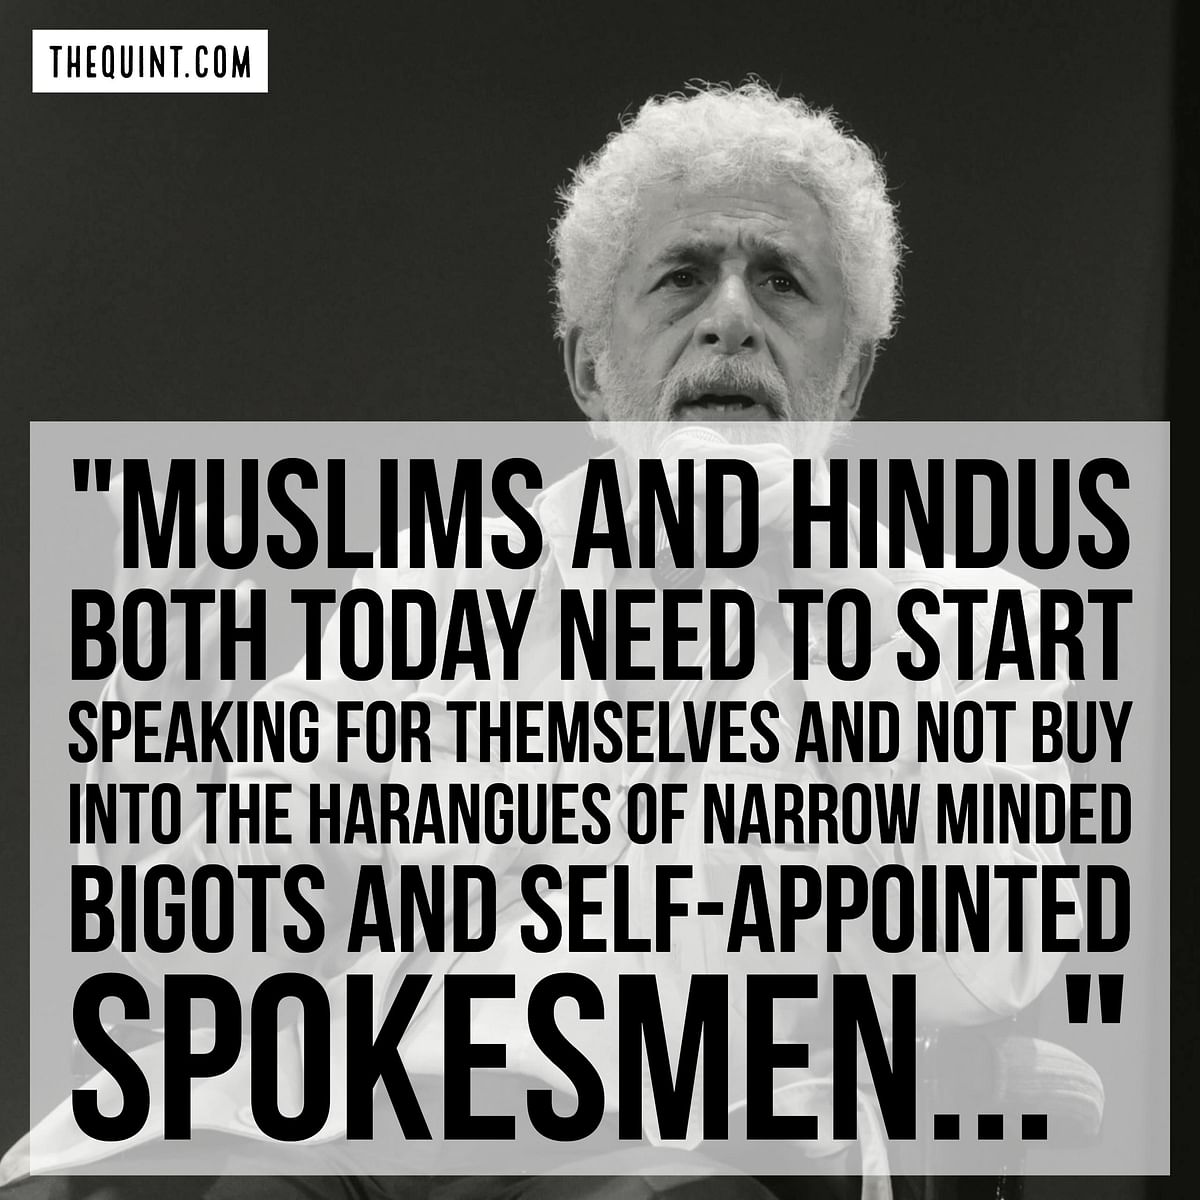 Ten essential quotes from Naseeruddin Shah’s thoughts on being an Indian Muslim today.